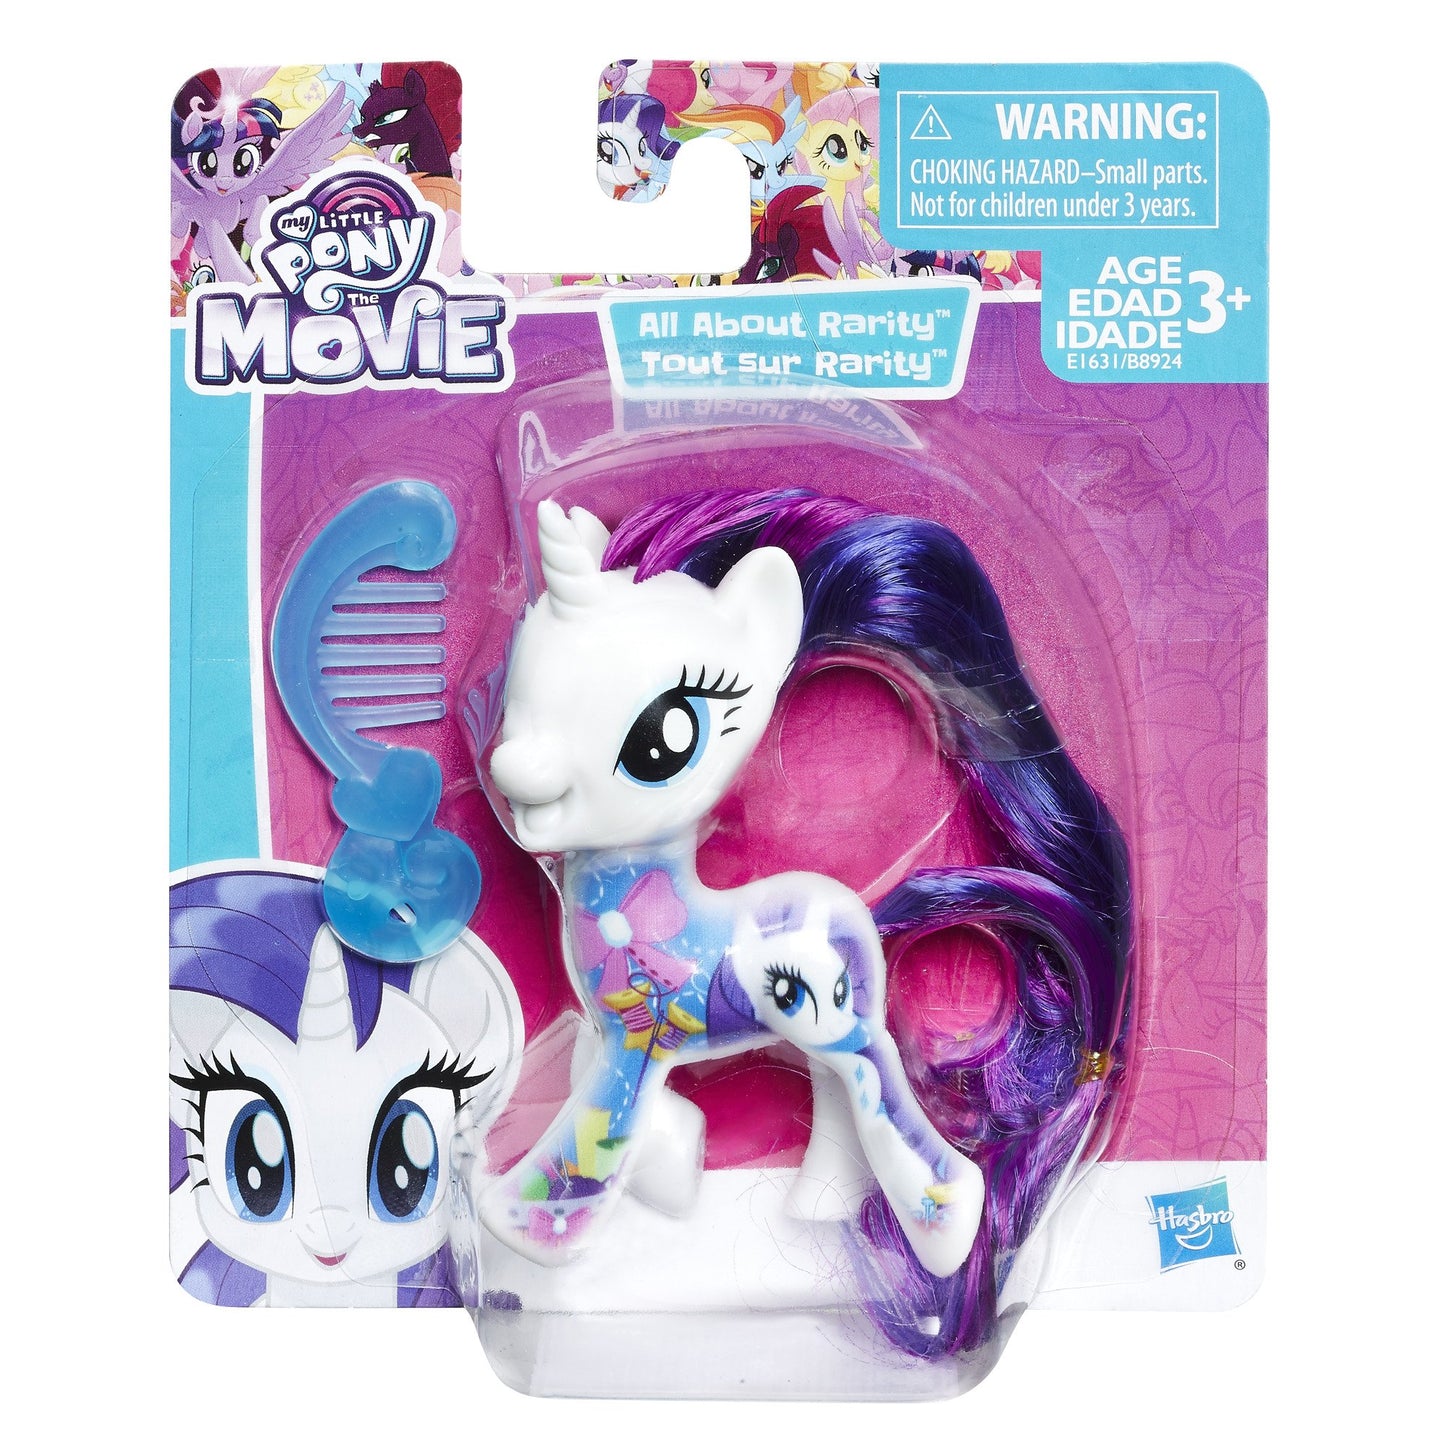 Hasbro Canada Corporation E1631AS00 My Little Pony: The Movie All About Rarity